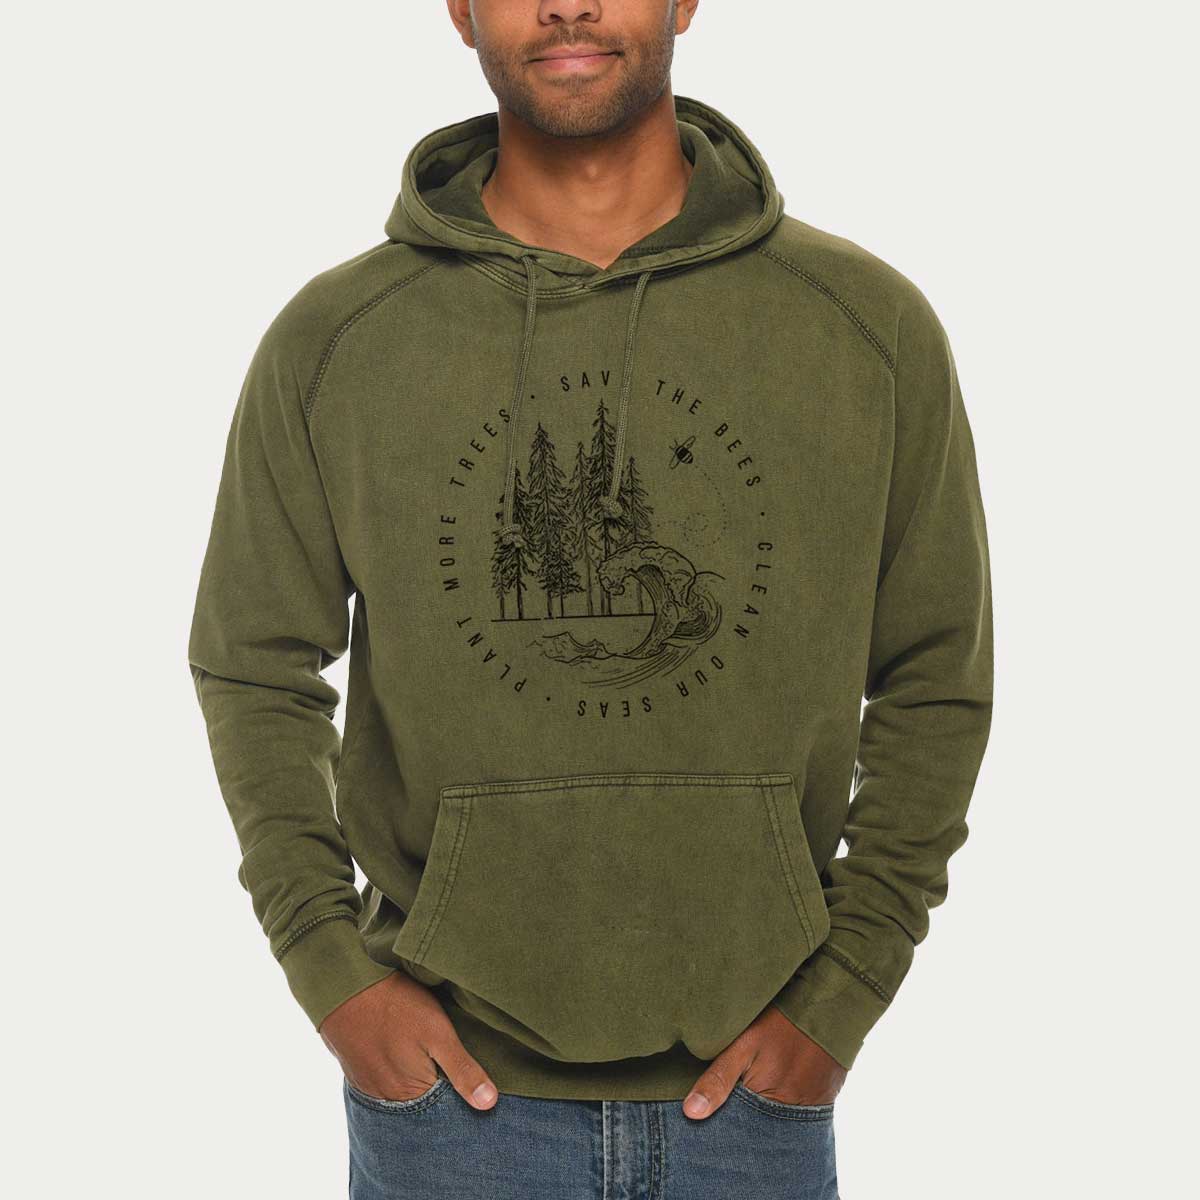 Save the Bees, Clean our Seas, Plant more Trees  - Mid-Weight Unisex Vintage 100% Cotton Hoodie